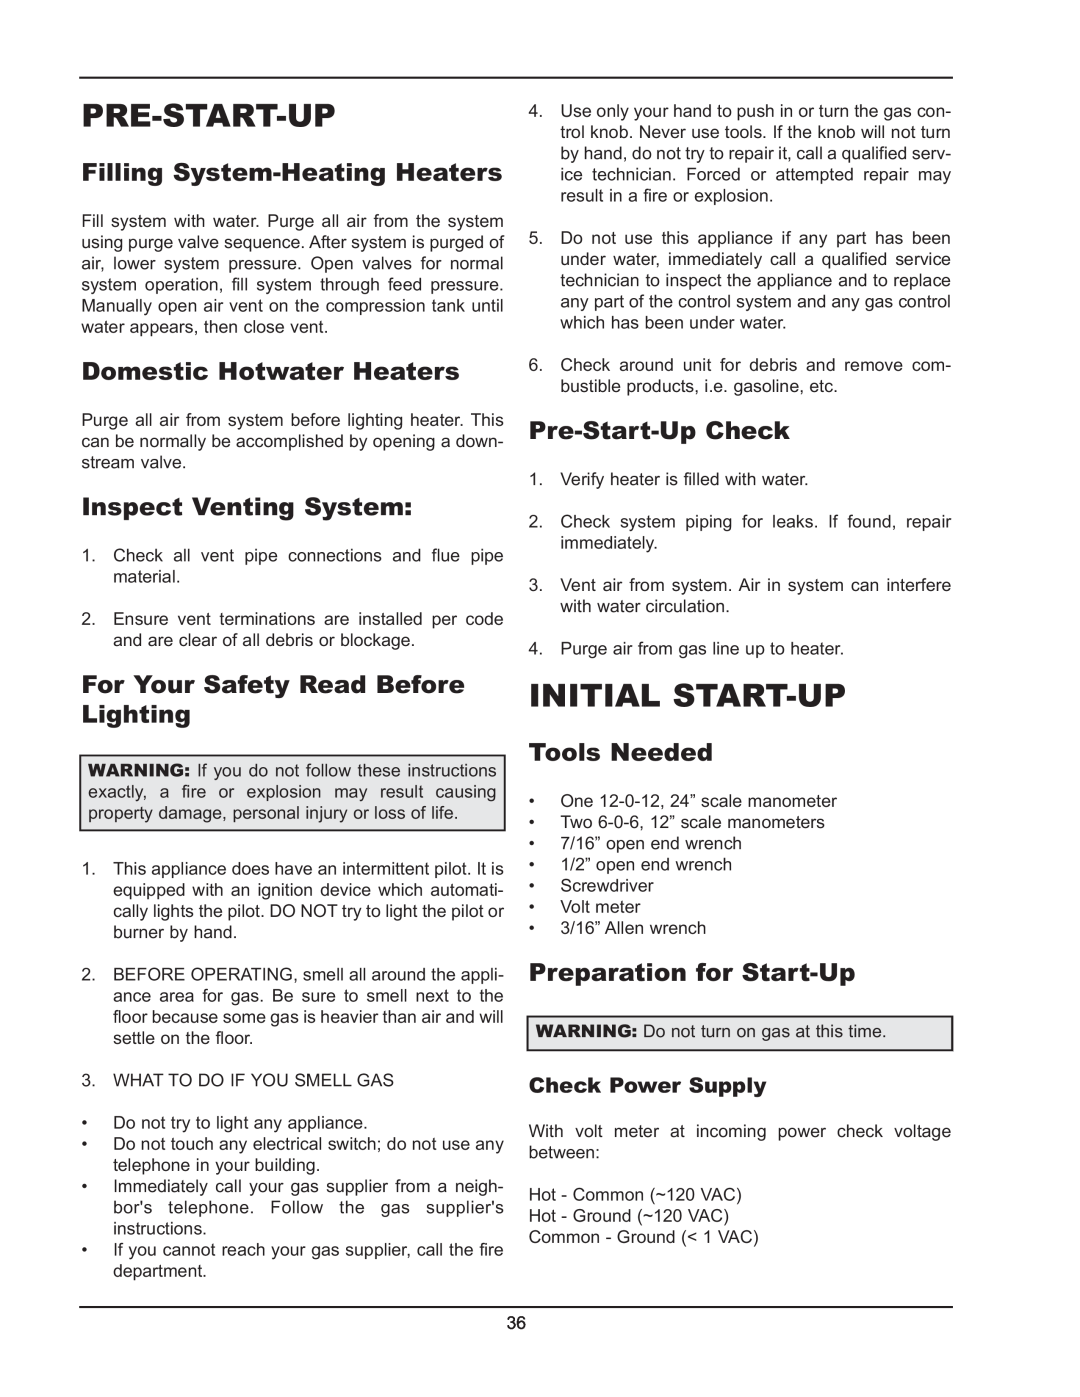 Raypak 122-322 manual Initial Start-Up, Filling System-HeatingHeaters, Domestic Hotwater Heaters, Pre-Start-UpCheck 